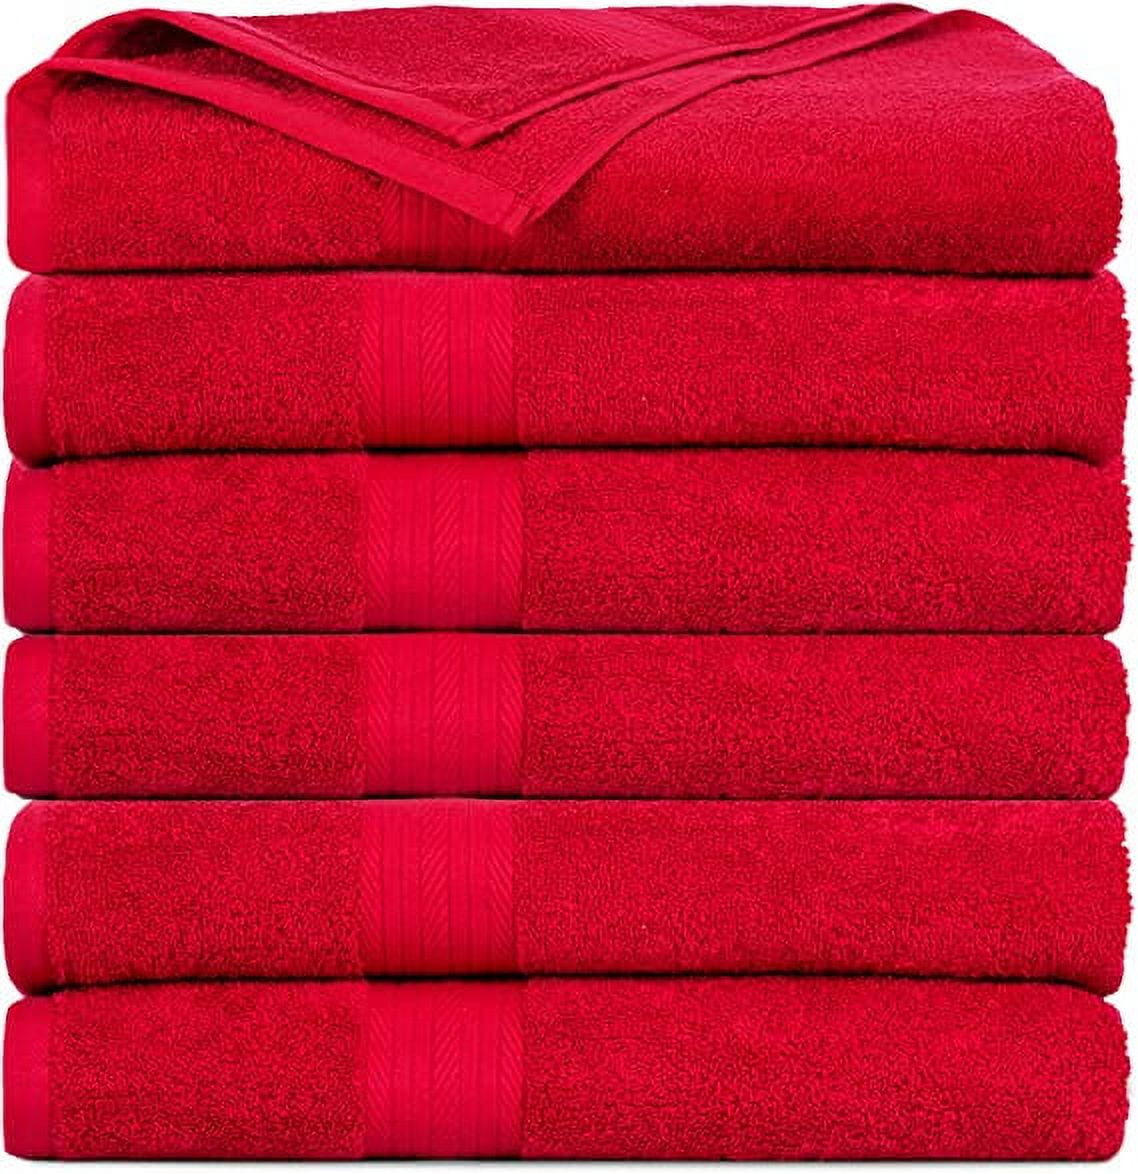 Mainstays 4-Pack 16”x26” Woven Kitchen Towel Set, Red Sedona 